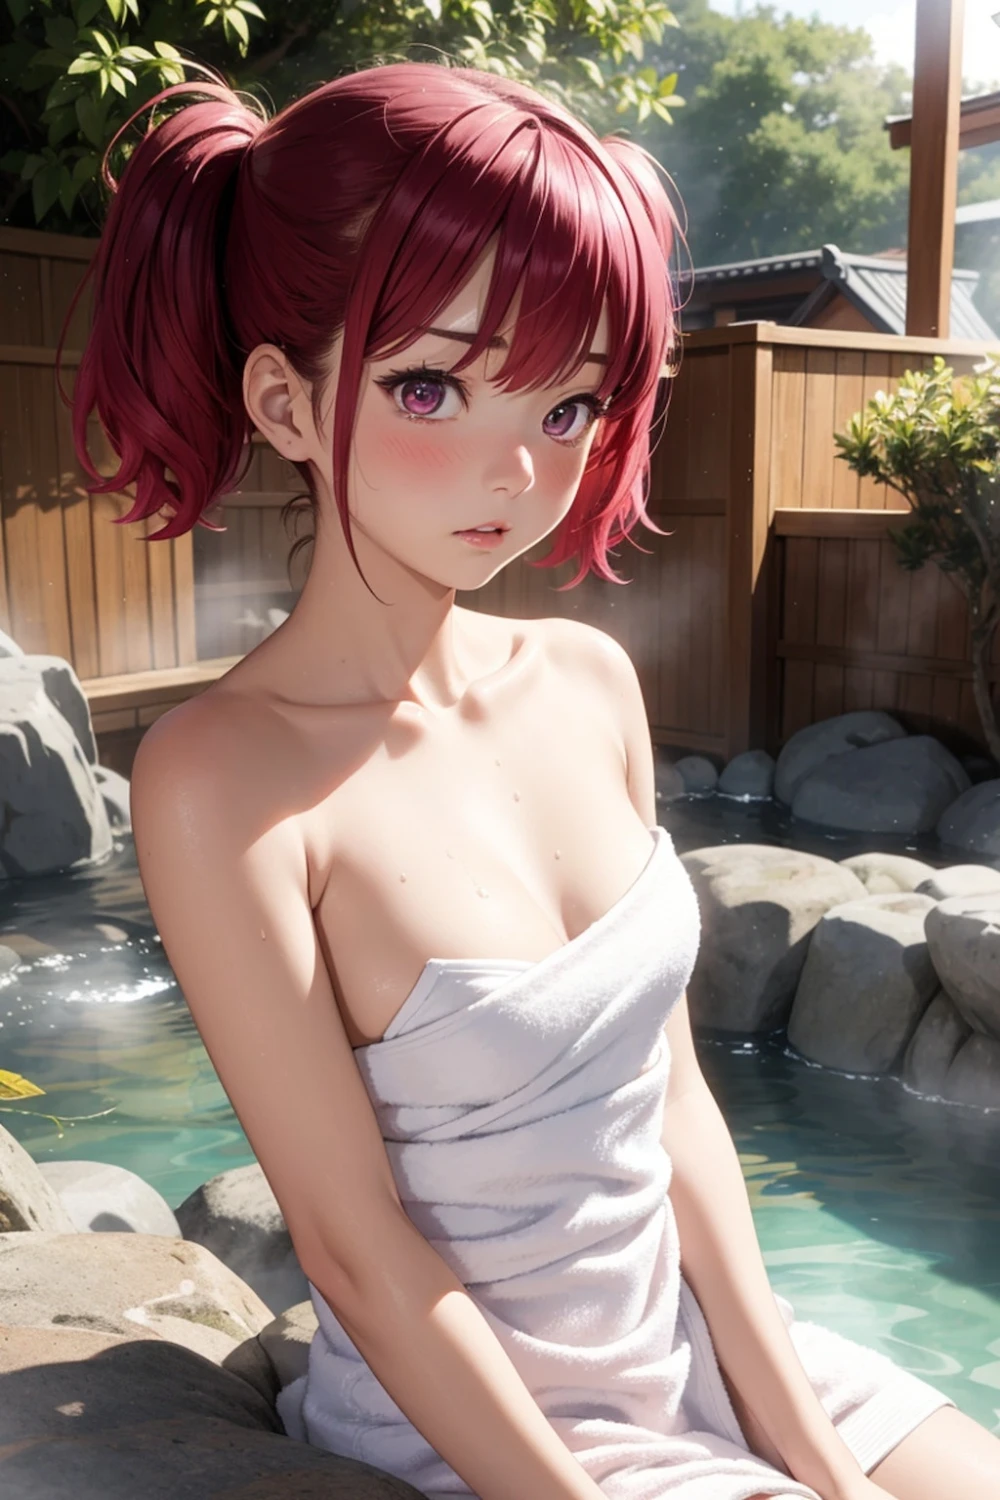 onsen-anime-style-all-ages-26